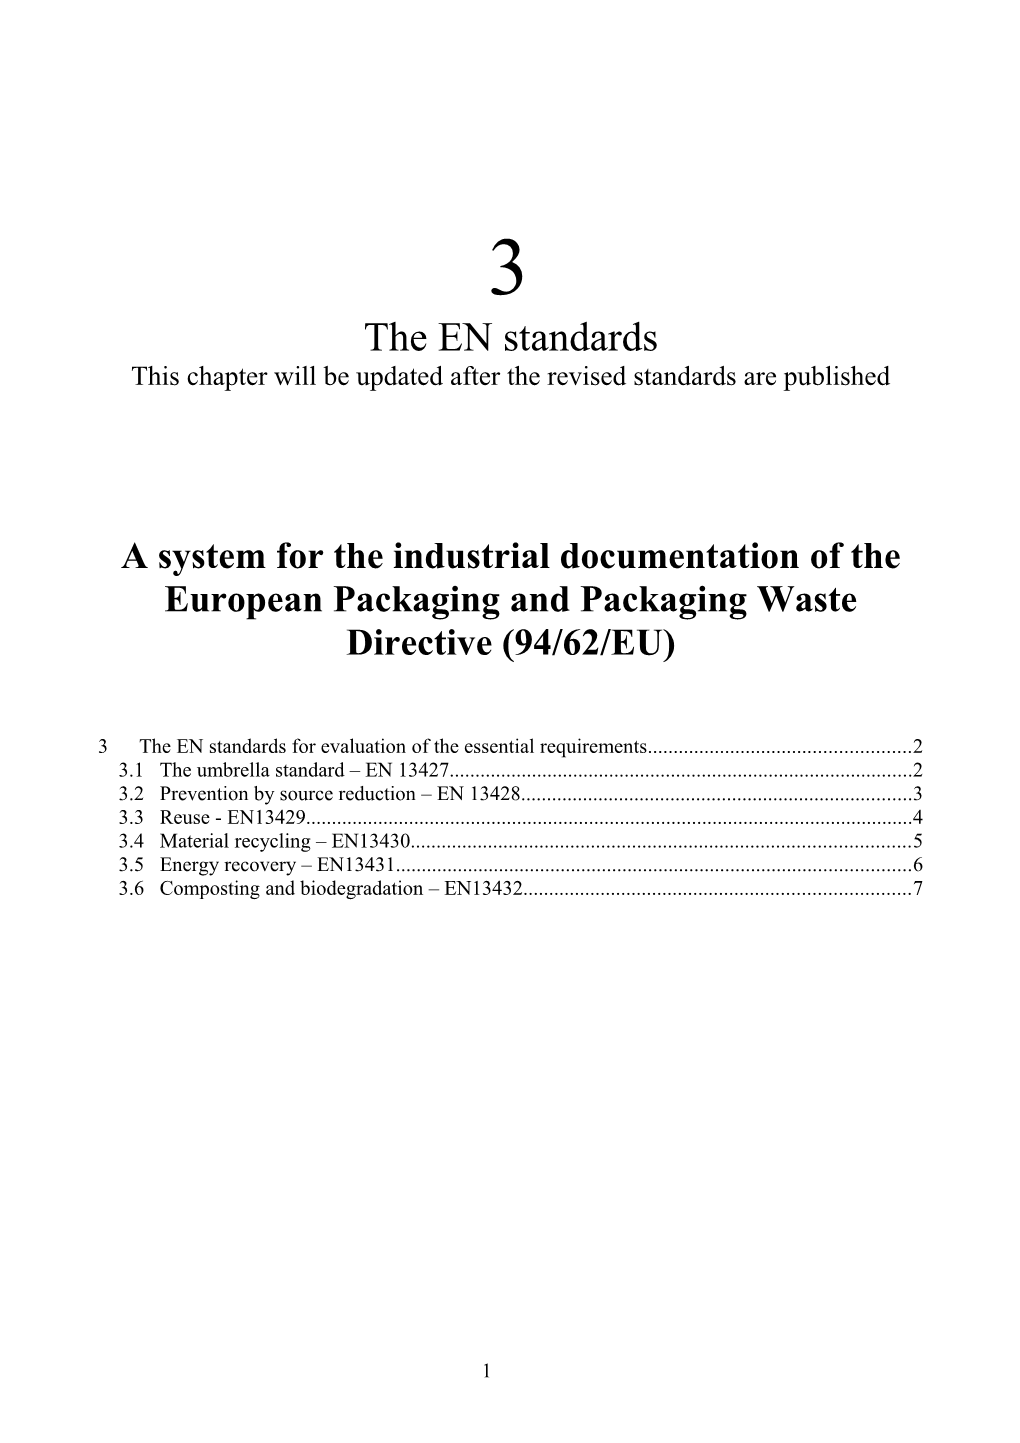 A System for the Industrial Documentation of the European Packaging and Packaging Waste